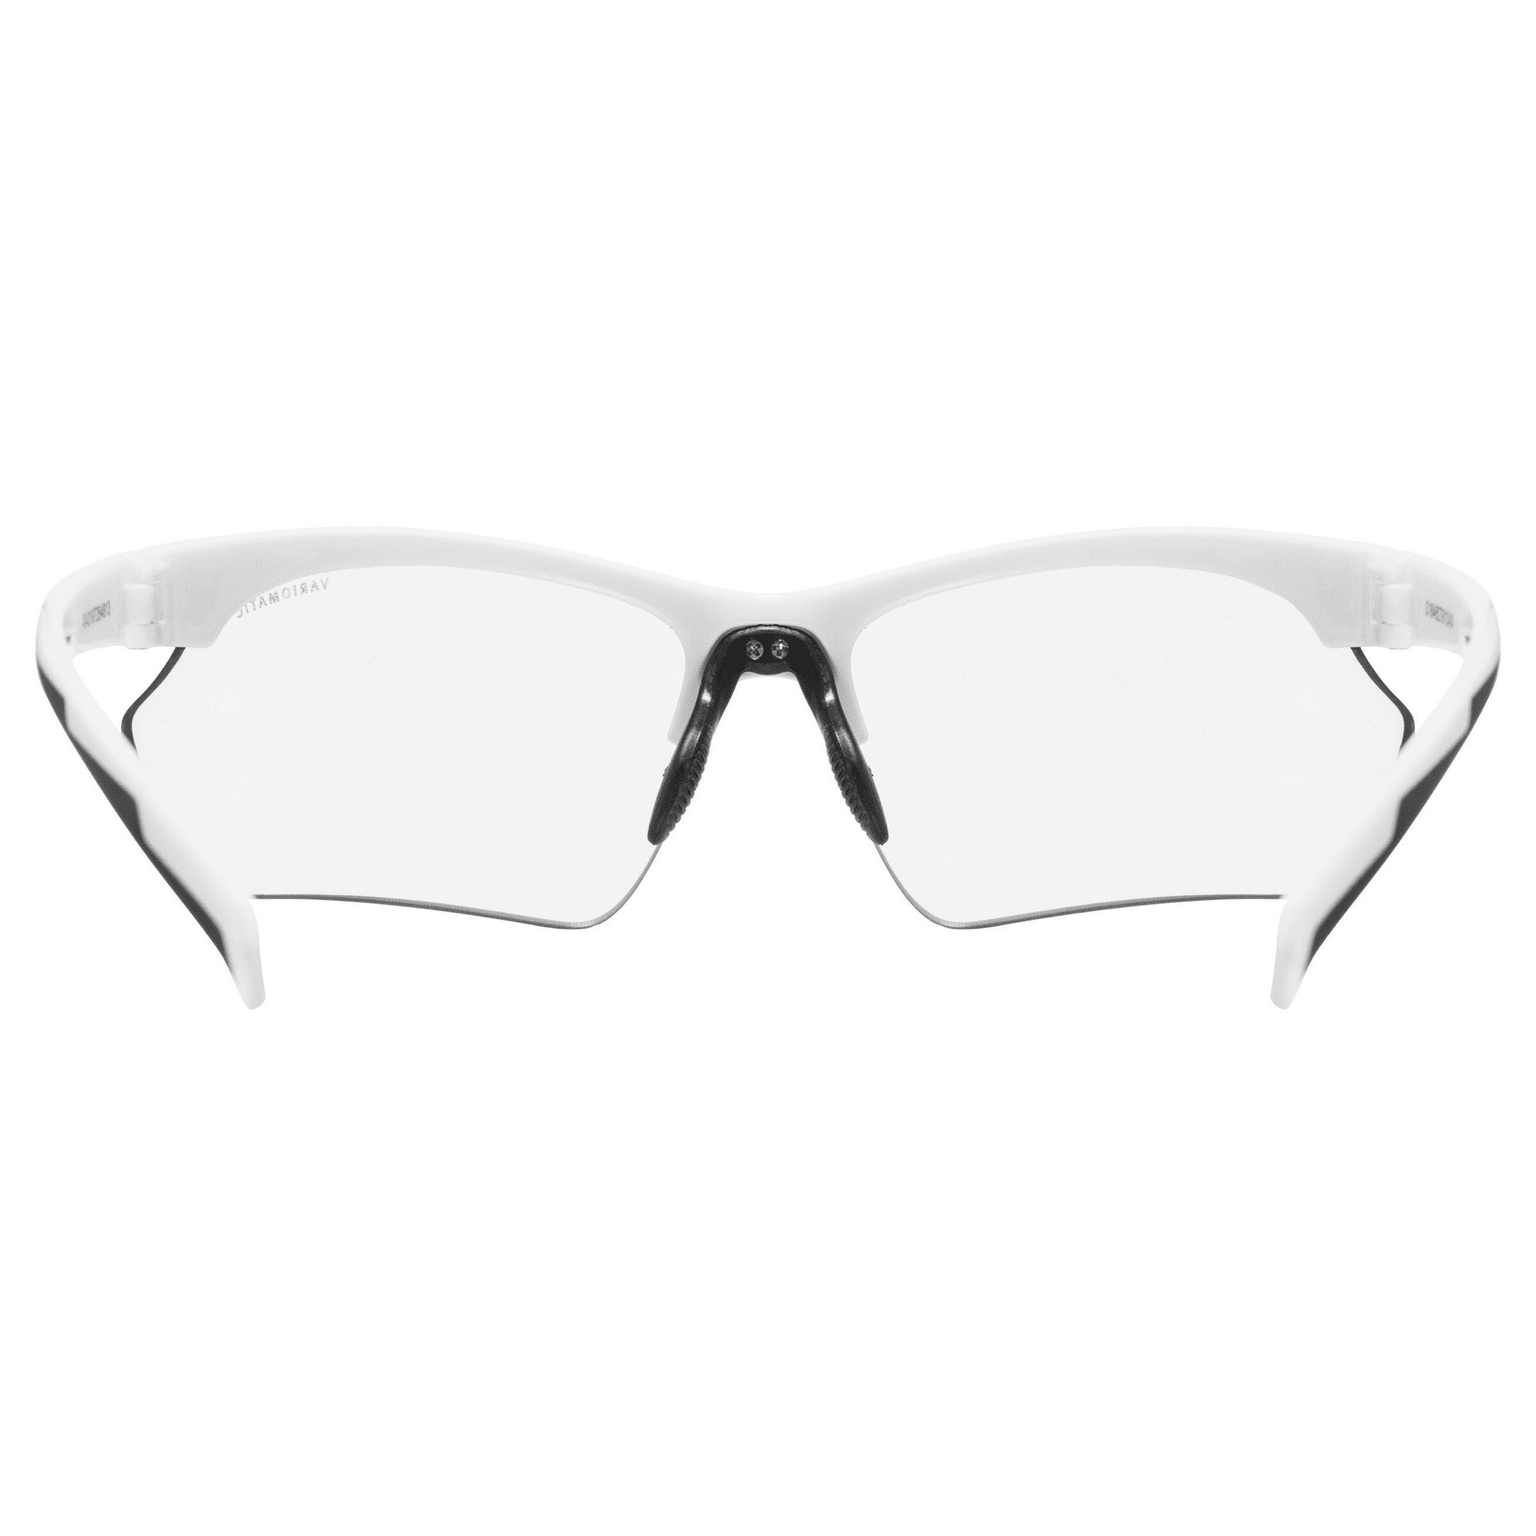 Uvex Uvex Sportstyle 802 V small Lunettes de sport blanc 6